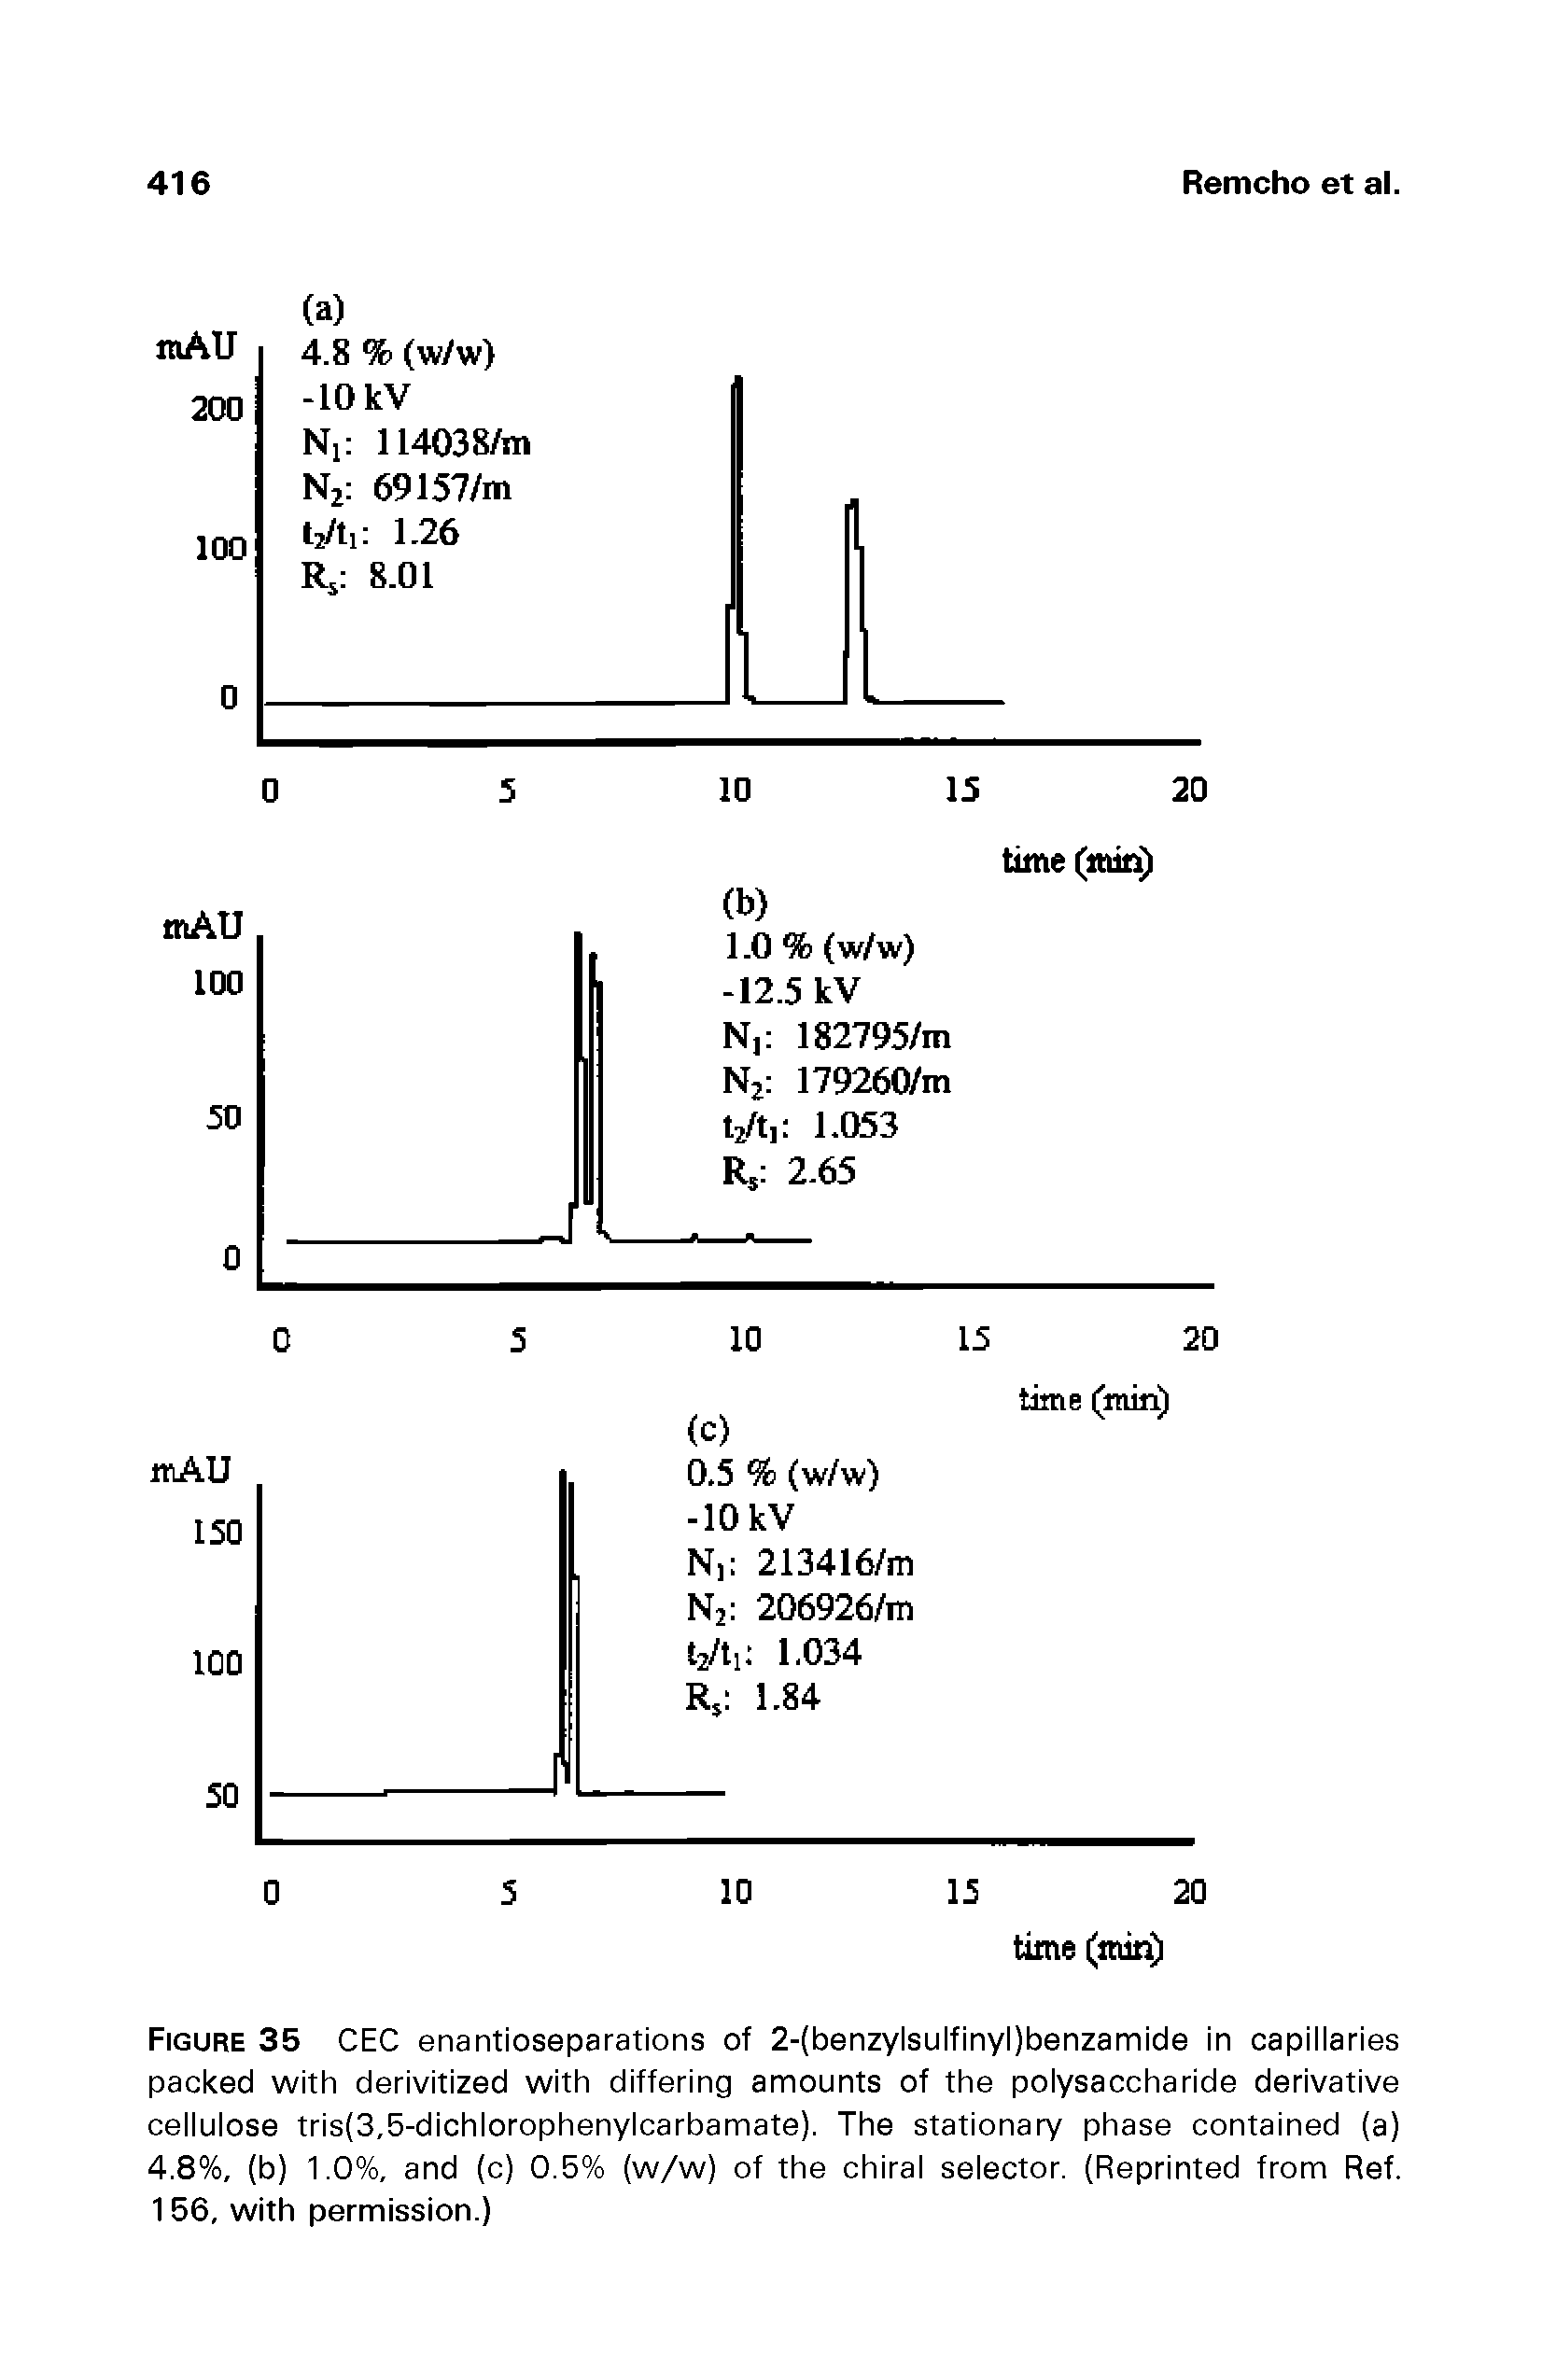 Figure 35 CEC enantioseparations of 2-(benzylsulfinyl)benzamide in capillaries packed with derivitized with differing amounts of the polysaccharide derivative cellulose tris(3,5-dichlorophenylcarbamate). The stationary phase contained (a) 4.8%, (b) 1.0%, and (c) 0.5% (w/w) of the chiral selector. (Reprinted from Ref. 1 56, with permission.)...